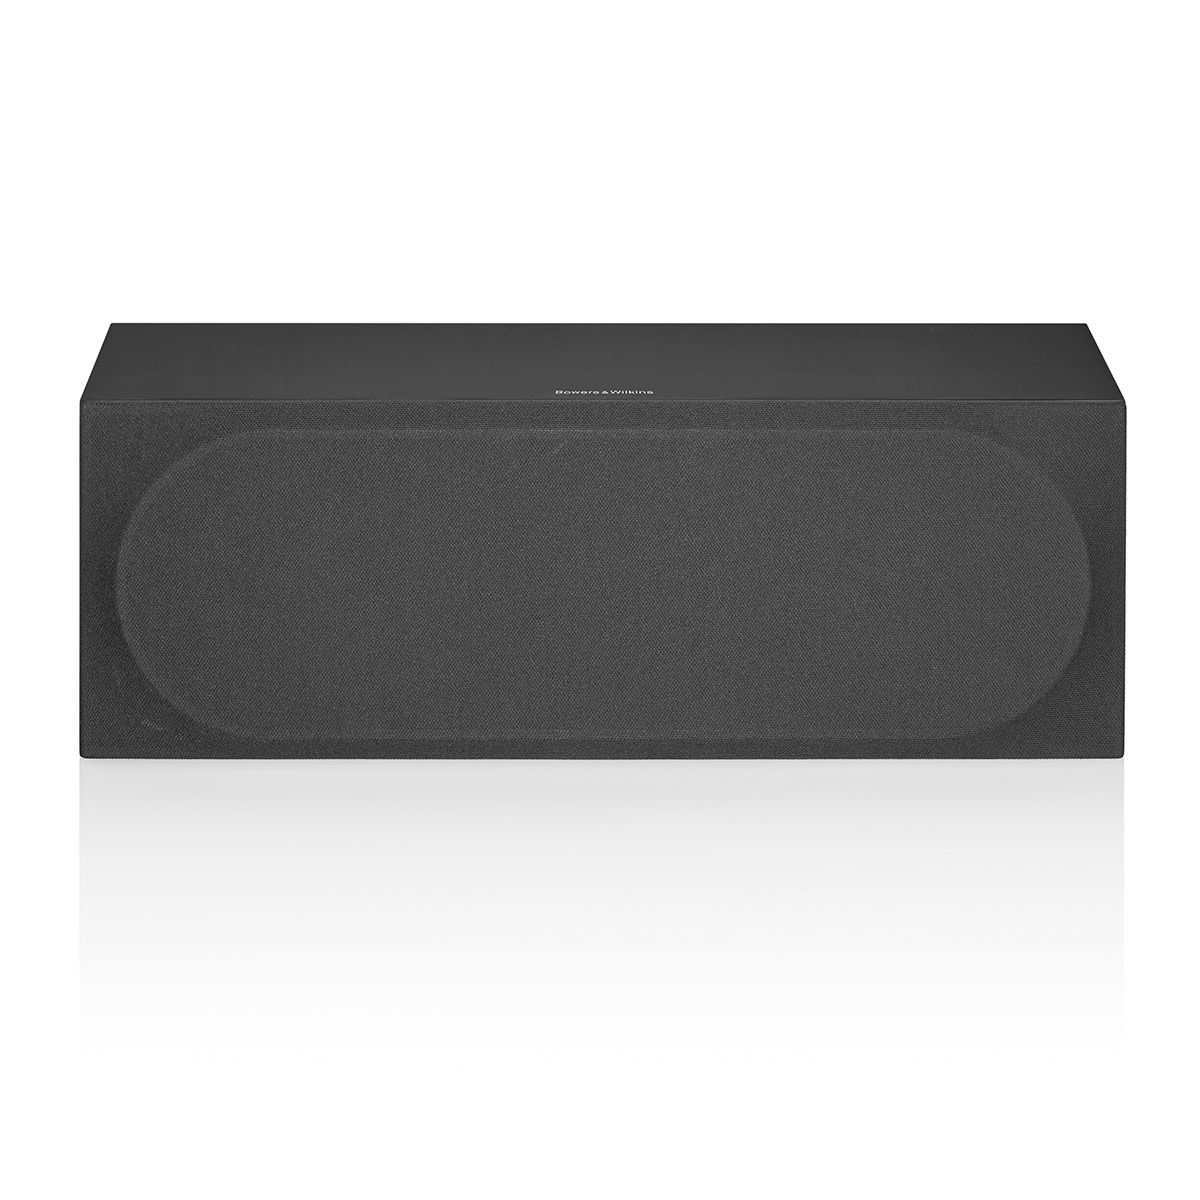 Bowers & Wilkins HTM72 S3 2-Way Center Channel Loudspeaker front with grille